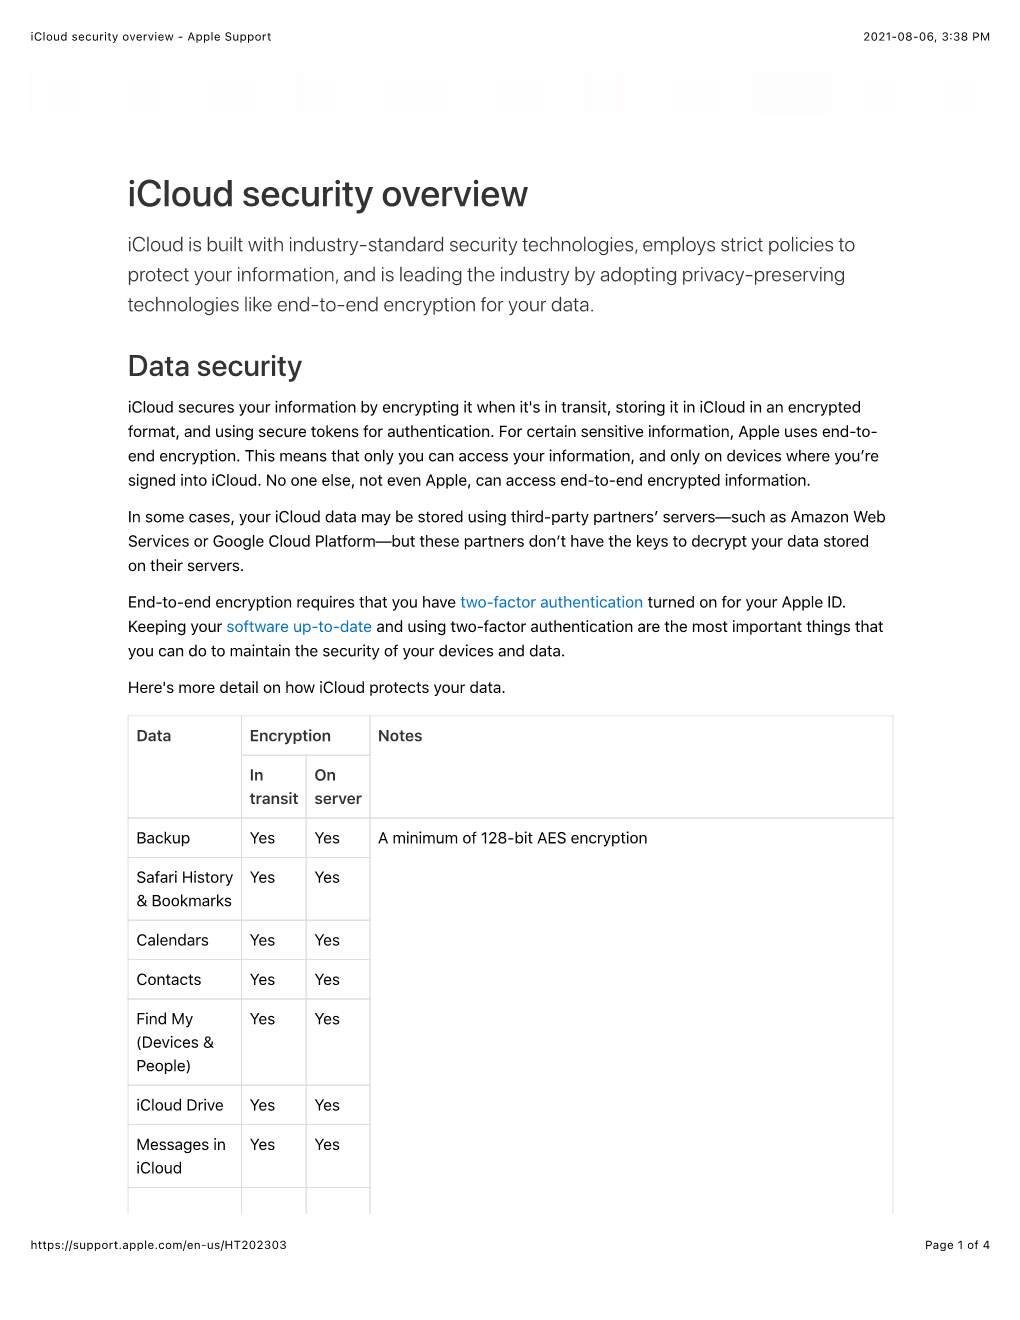 Icloud Security Overview - Apple Support 2021-08-06, 3:38 PM